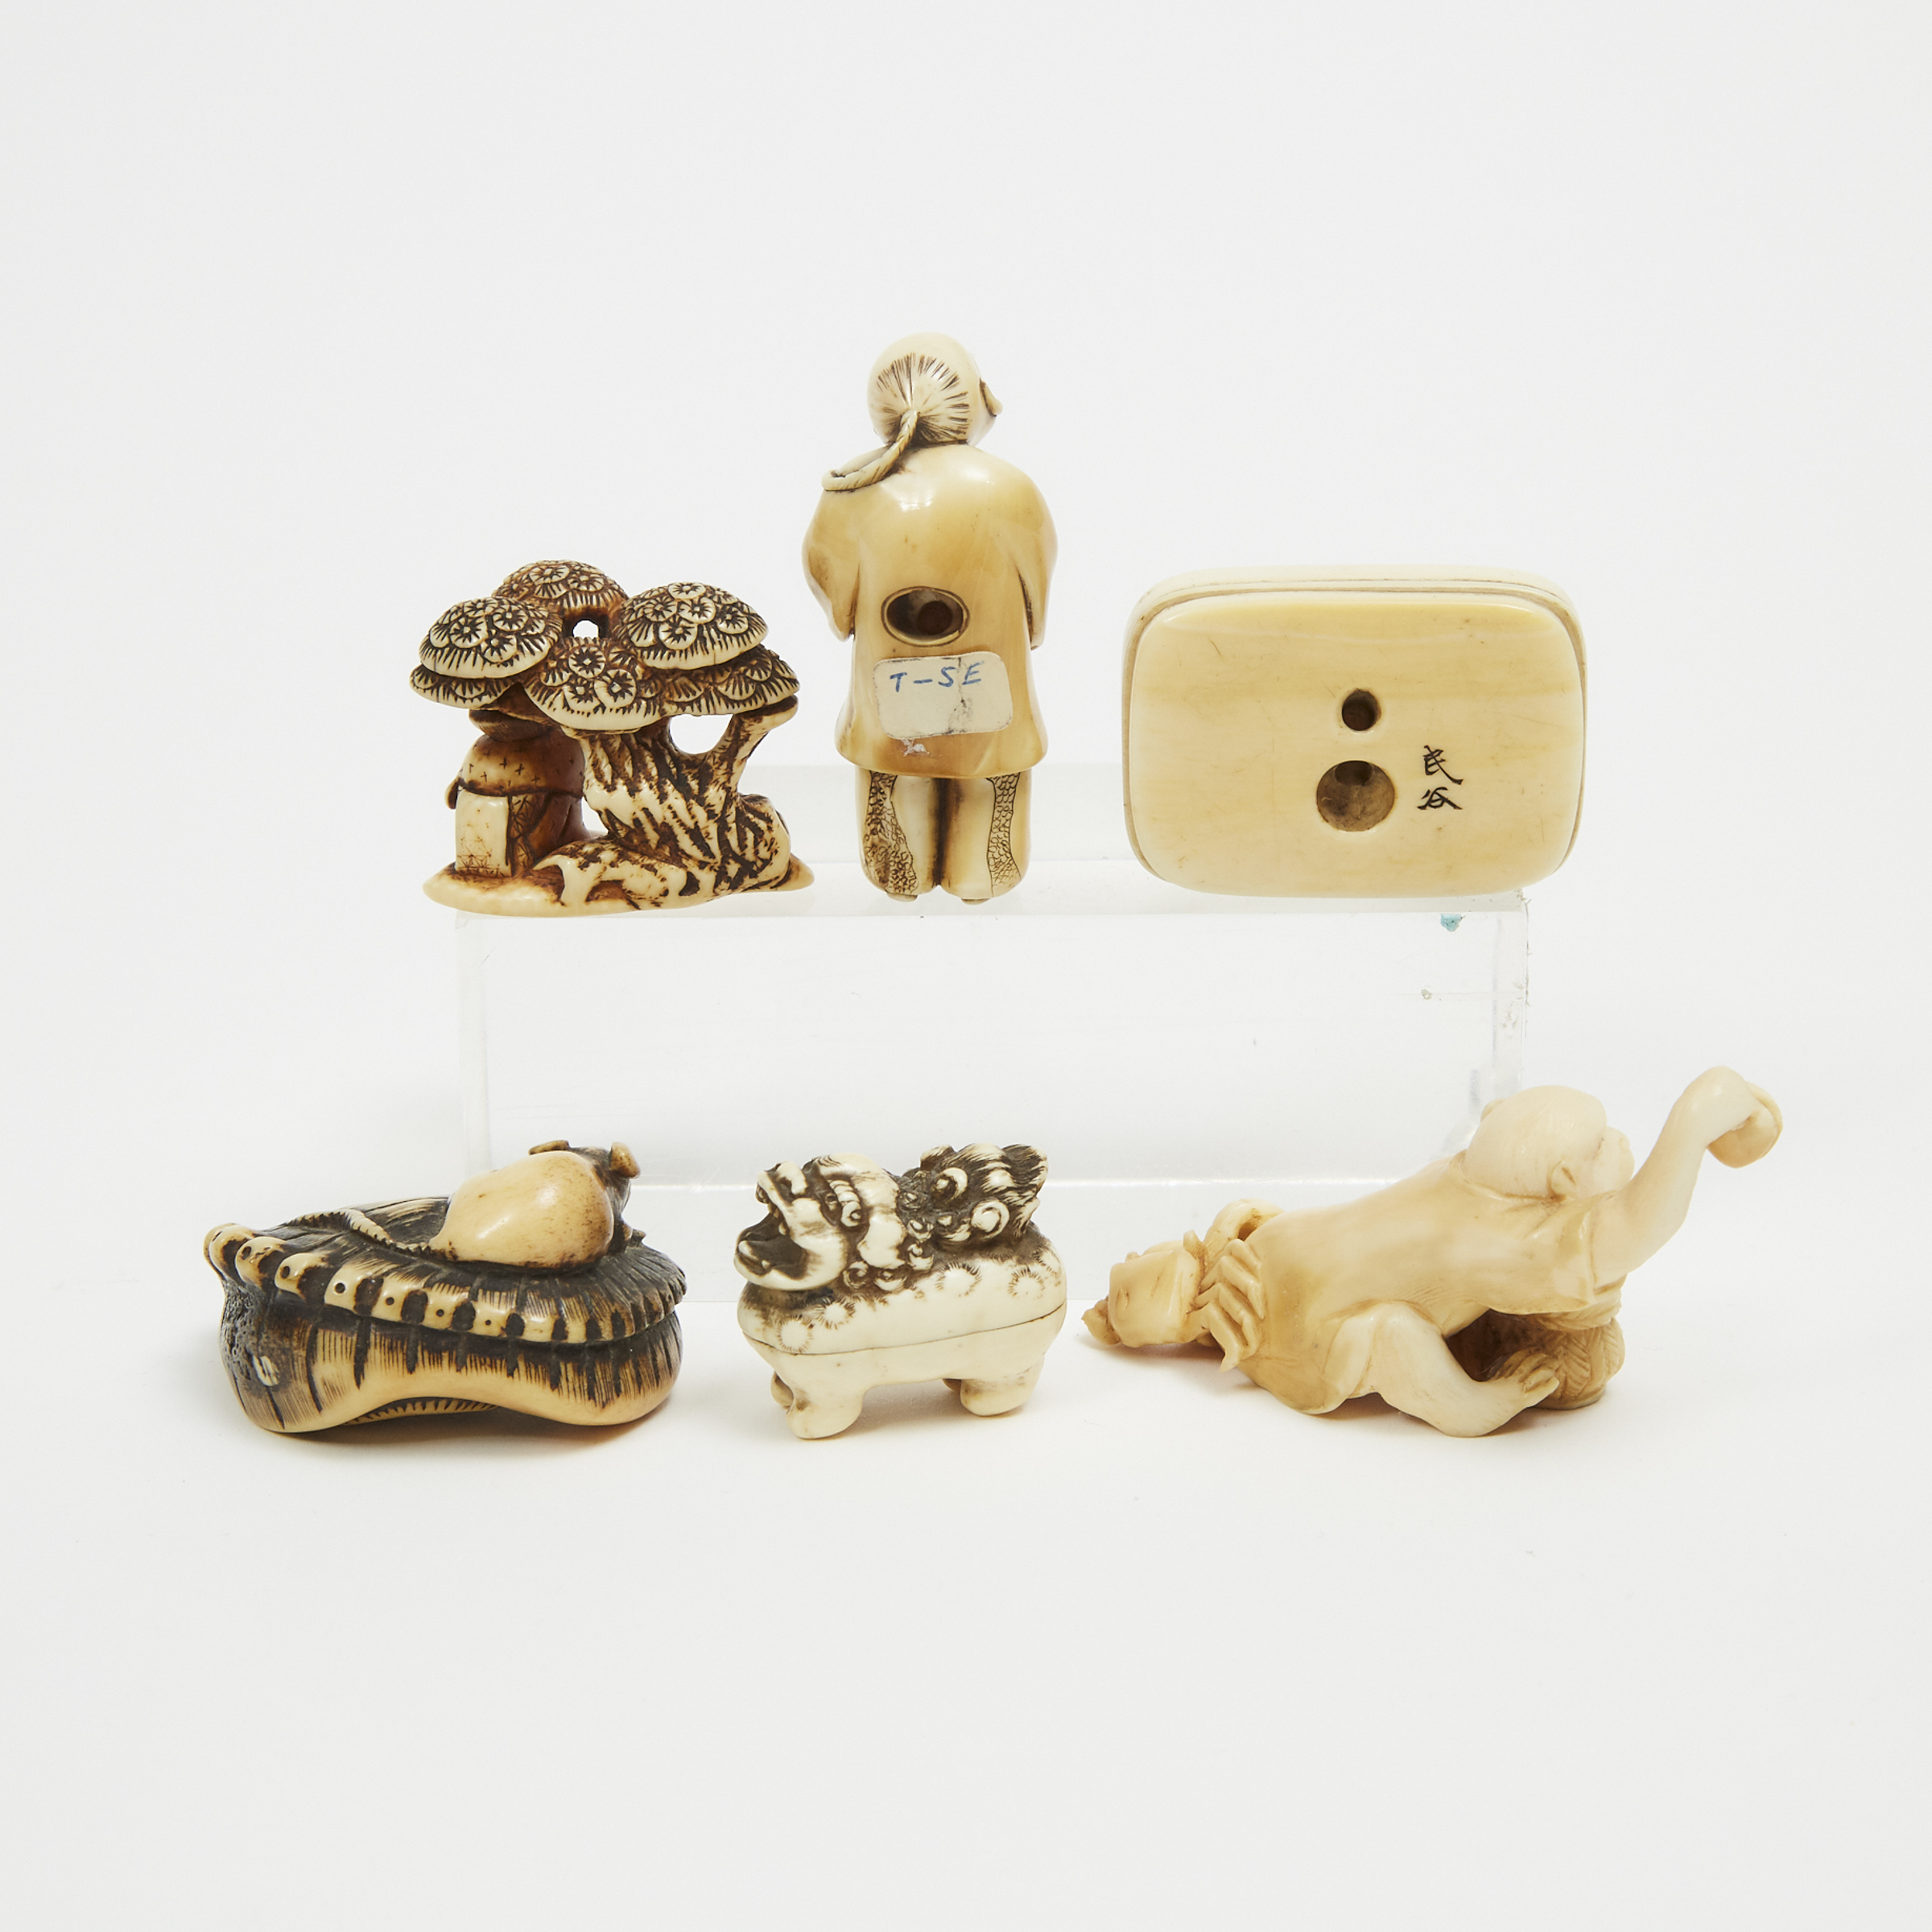 A Group of Six Ivory and Antler Netsuke, 19th/Early 20th Century